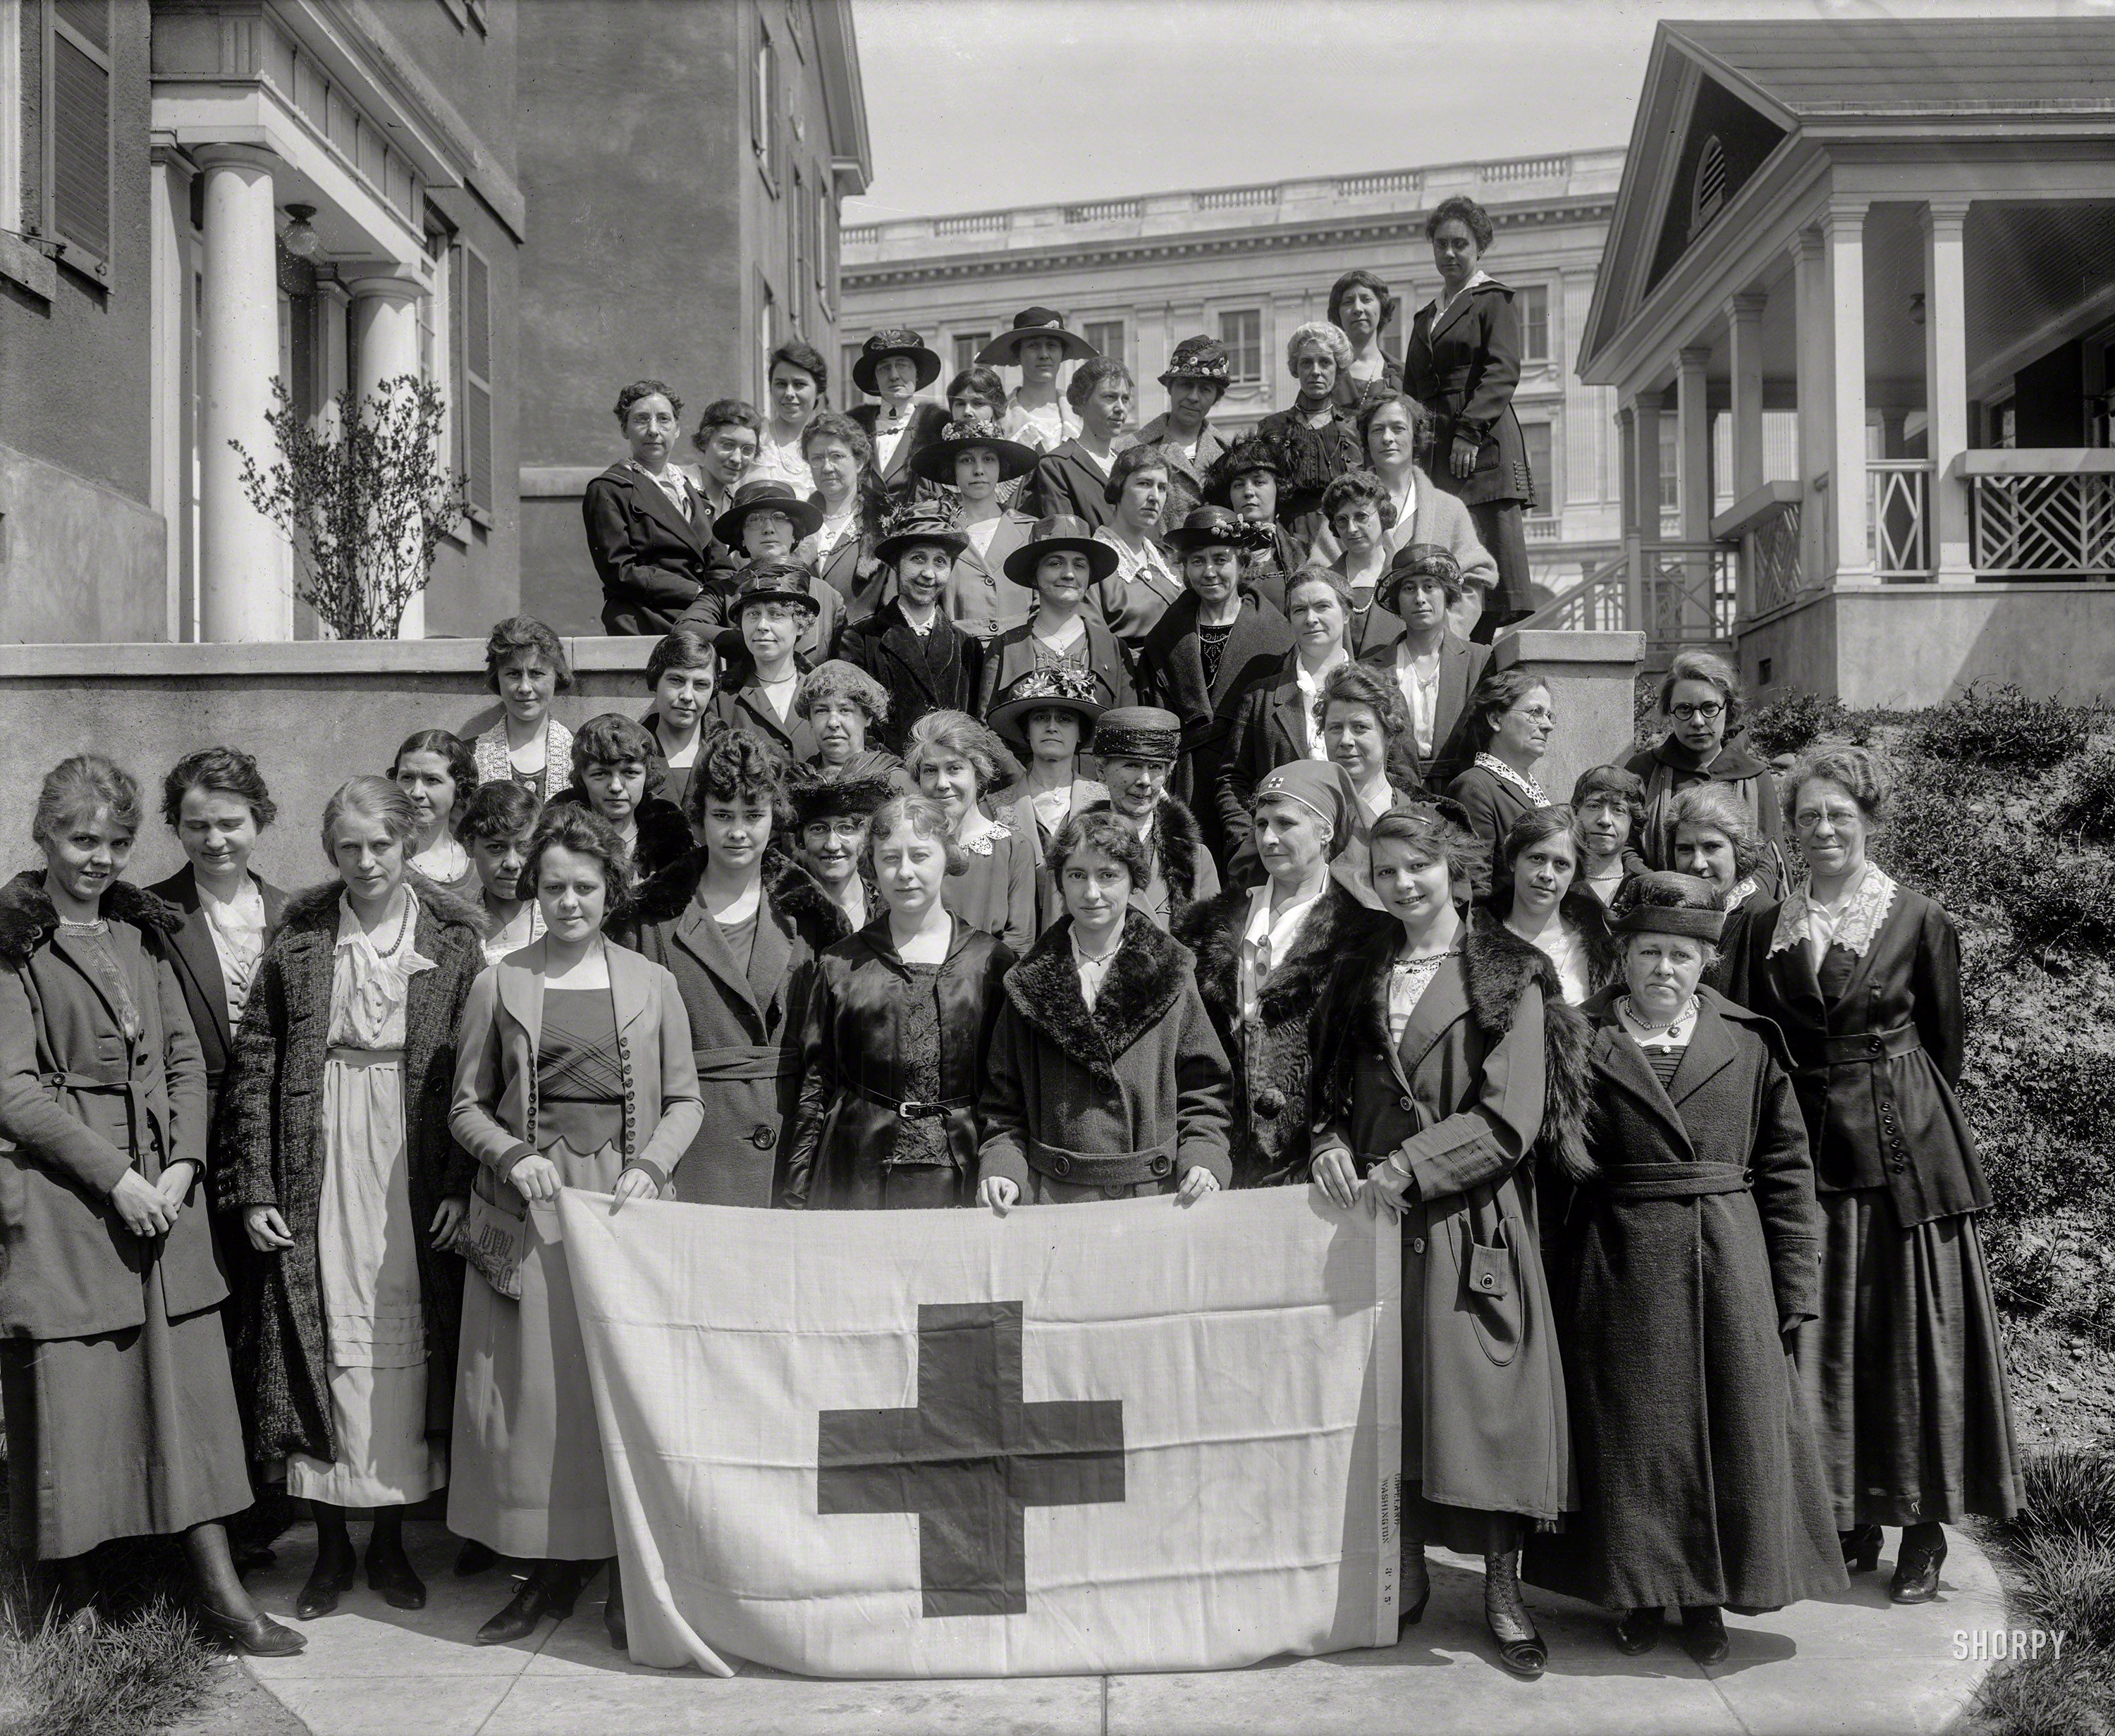 Washington, D.C., circa 1920. "Red Cross group, Government Hotels." National Photo Company Collection glass negative. View full size.